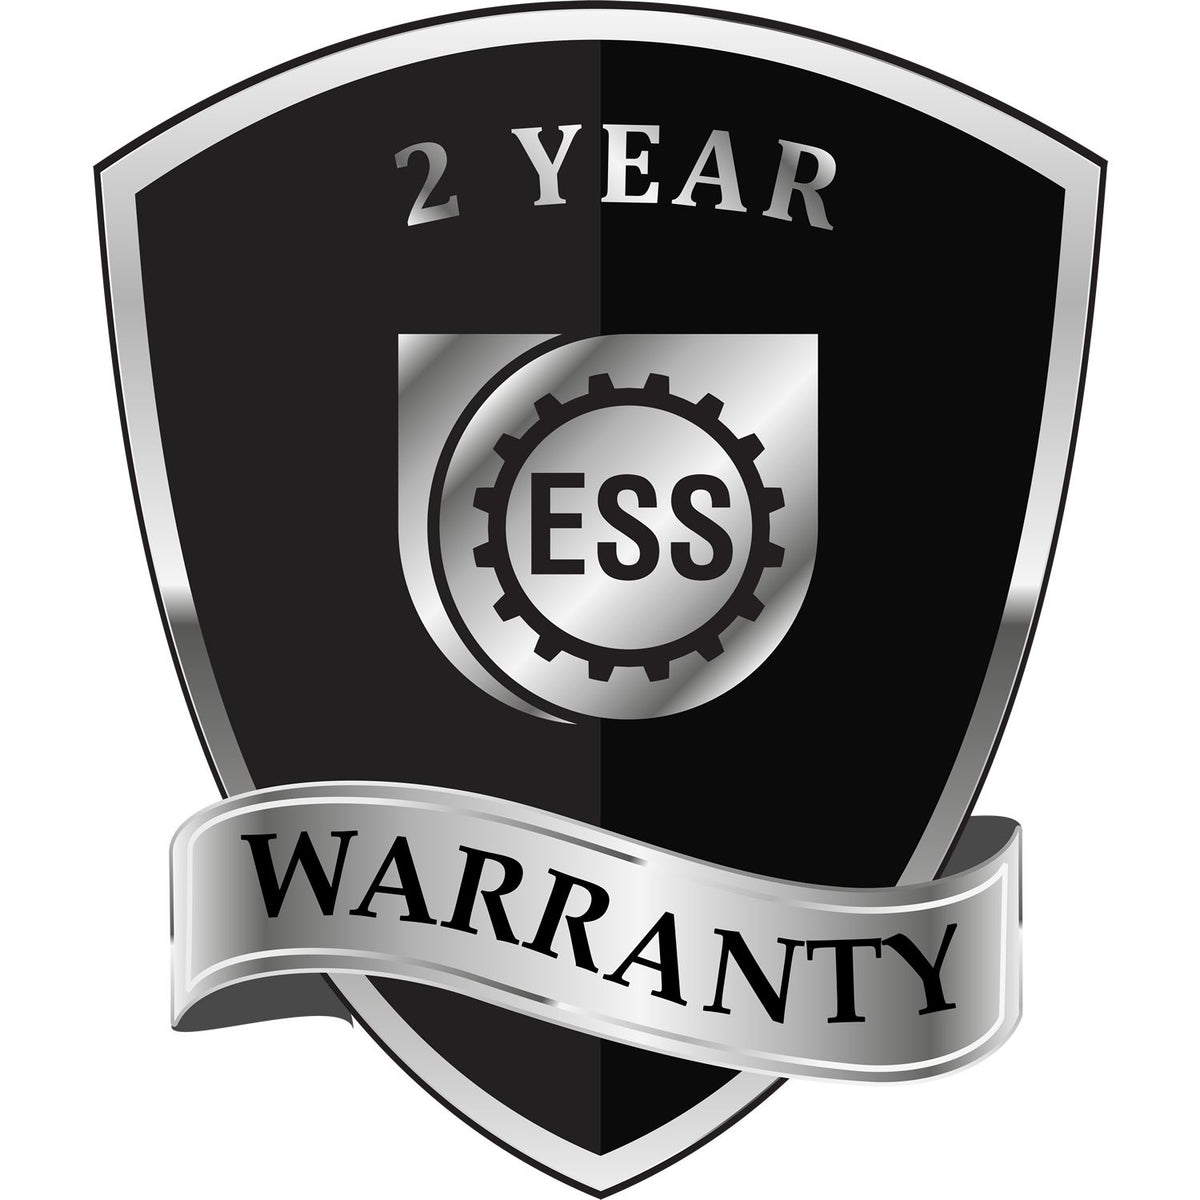 A black and silver badge or emblem showing warranty information for the Soft North Carolina Professional Geologist Seal